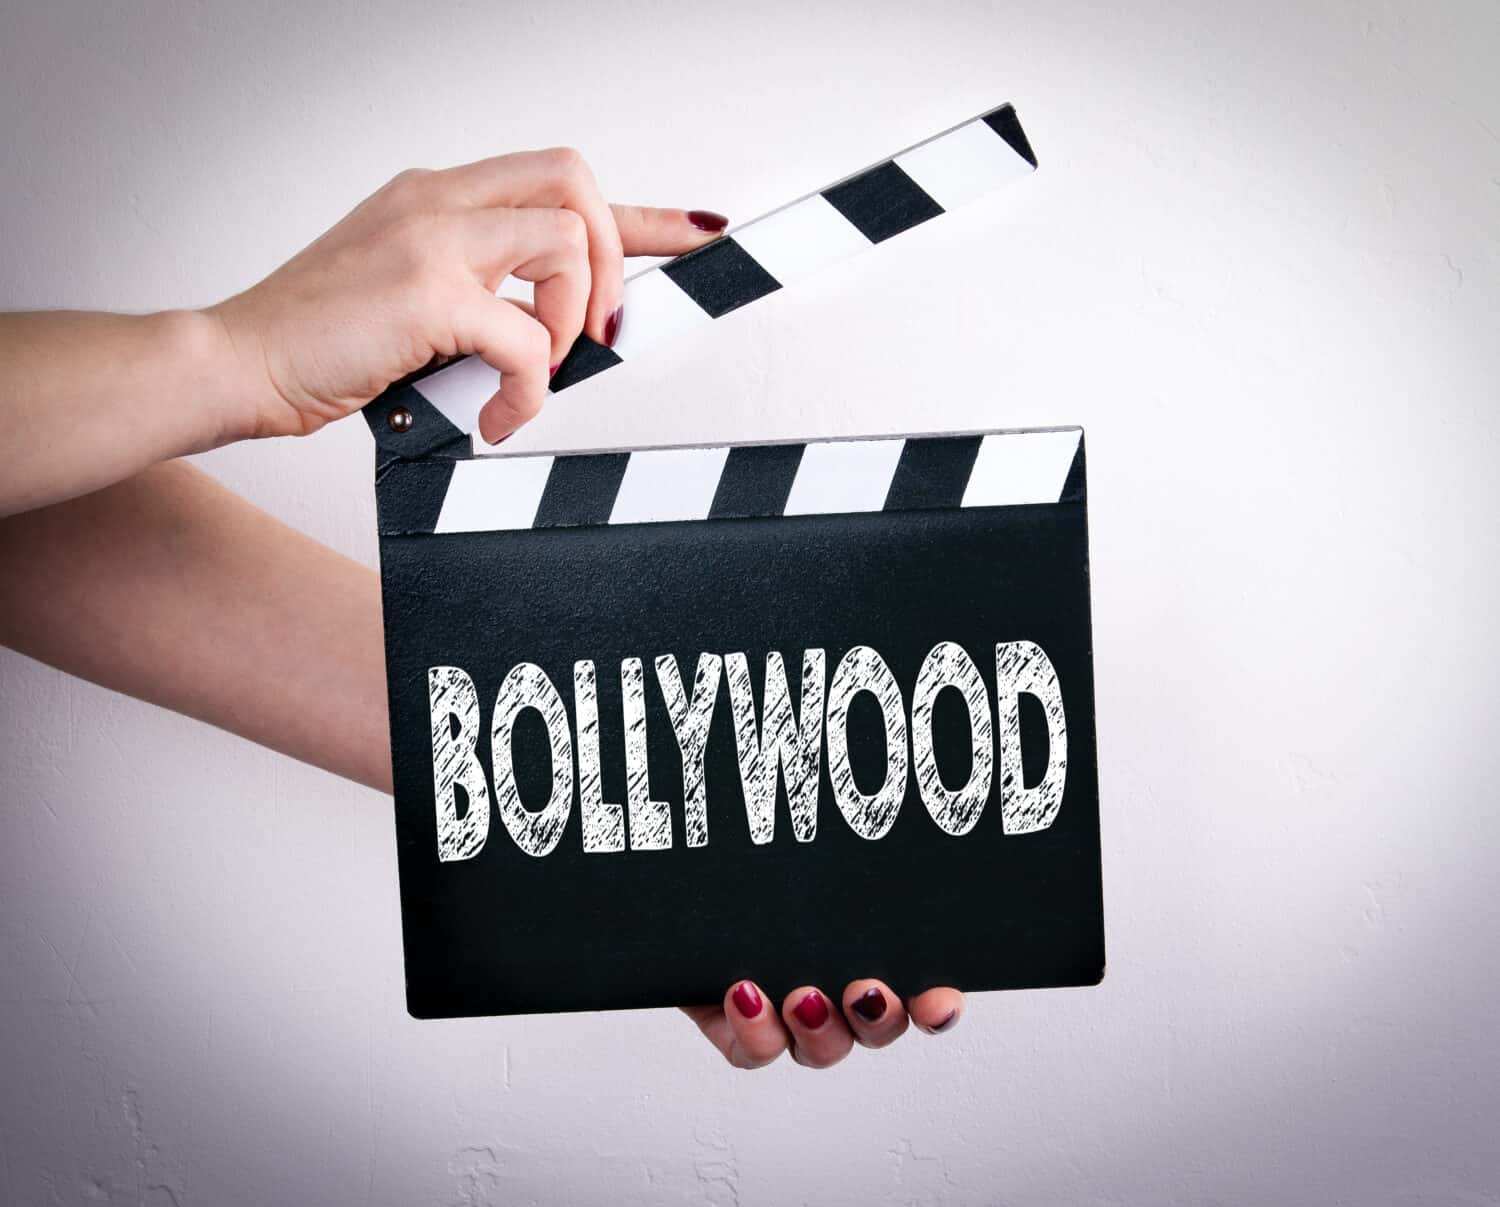 Bollywood. Female hands holding movie clapper